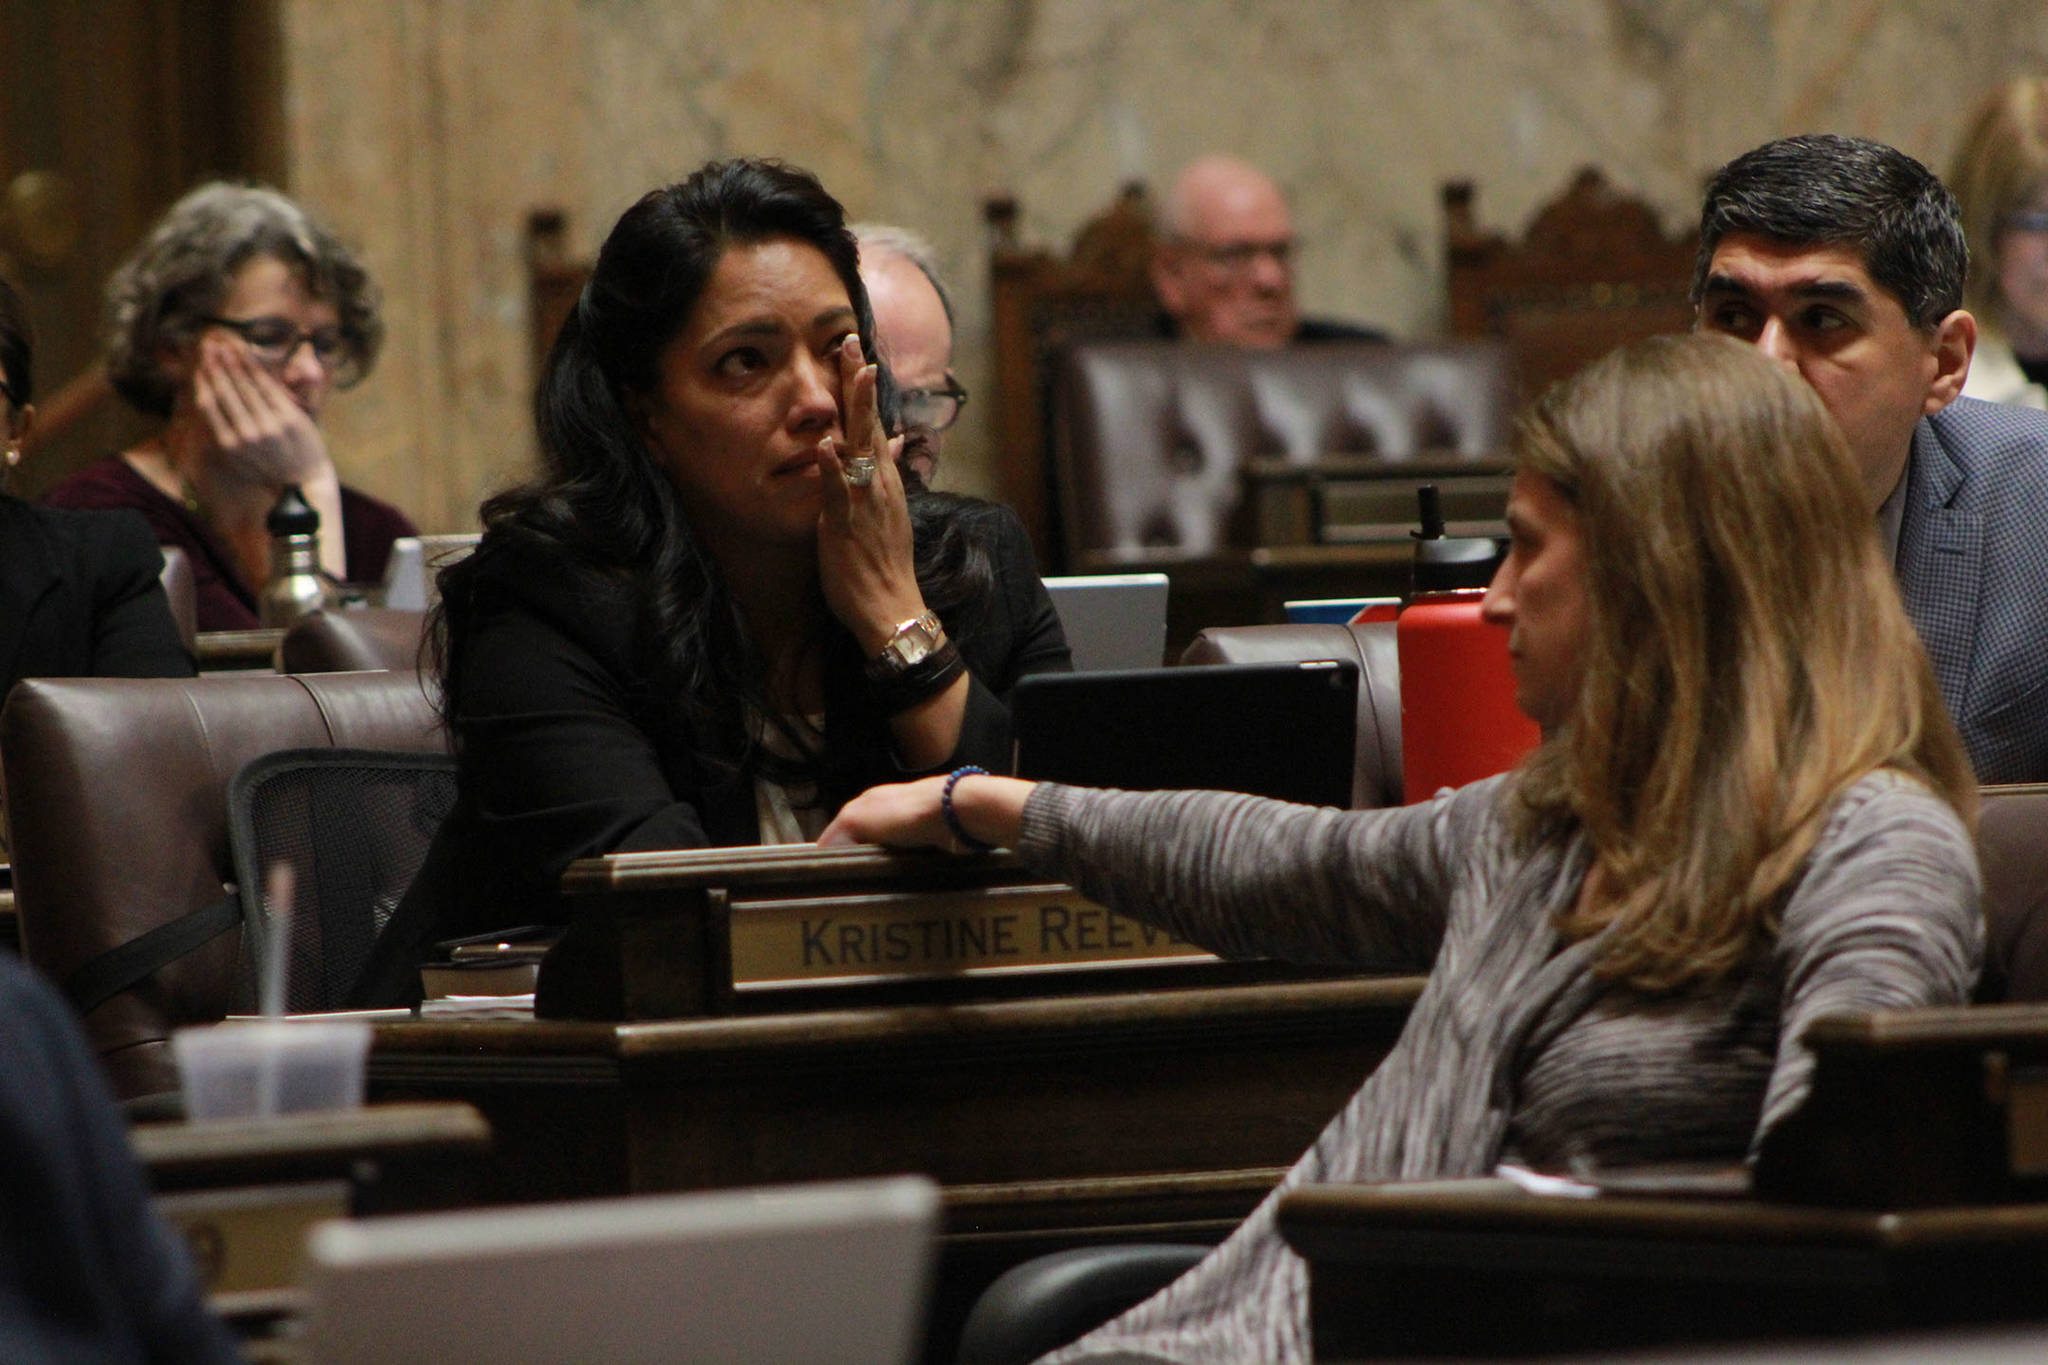 Rep. Kristine Reeves, D-Federal Way, battled tears during the House floor debate on a bill to ban bump stocks, while her colleague Tana Senn, D- Mercer Island turned to comfort her. Photo by Taylor McAvoy